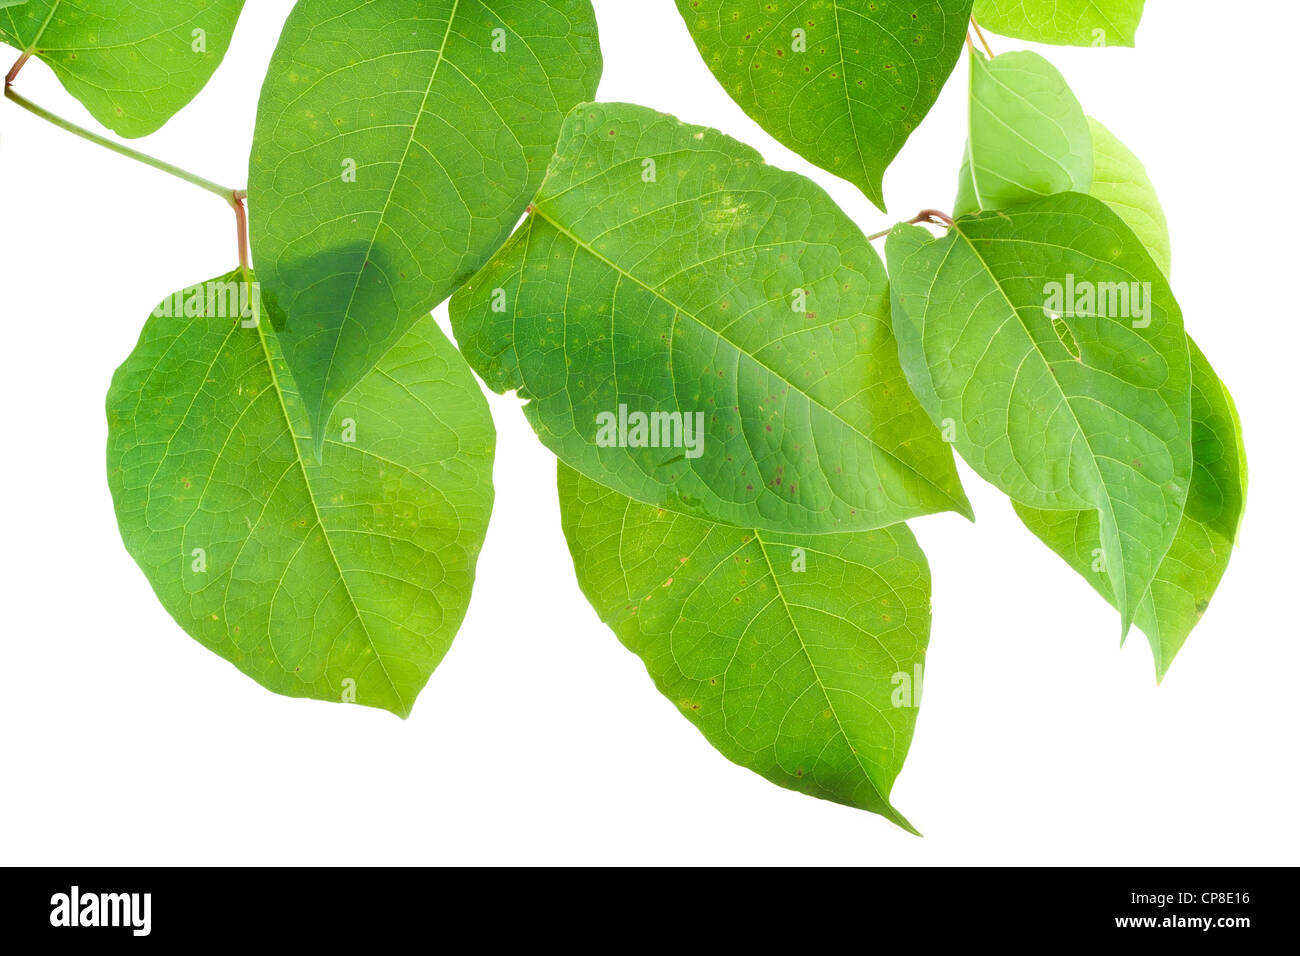 Real green Septembers plants leaves with defects. Isolated on white. Stock Photo